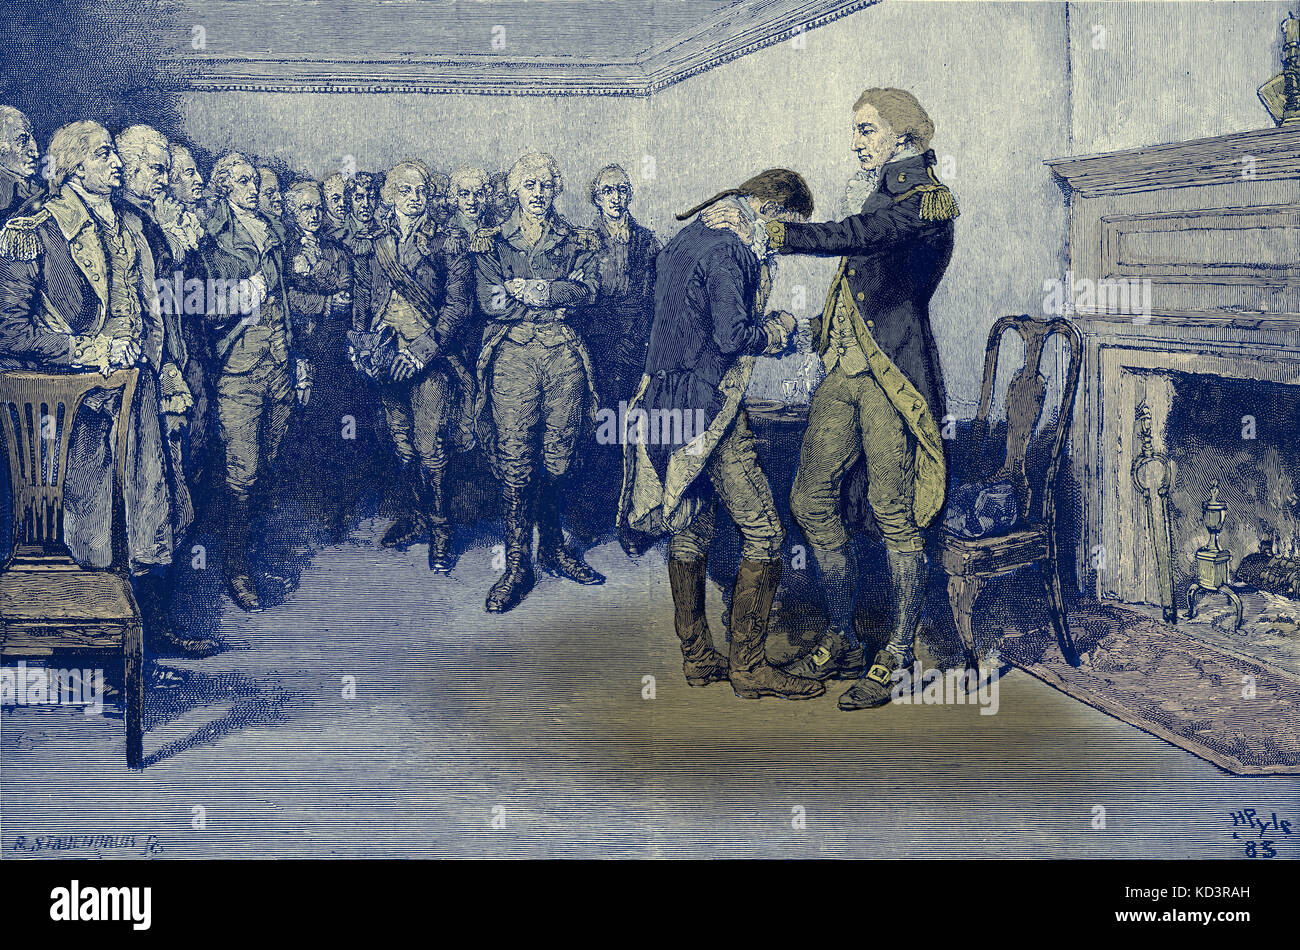 Washington takes leave of his officers, 4 December 1783, after the end of the American Revolution. Illustration by Howard Pyle, 1896 Stock Photo